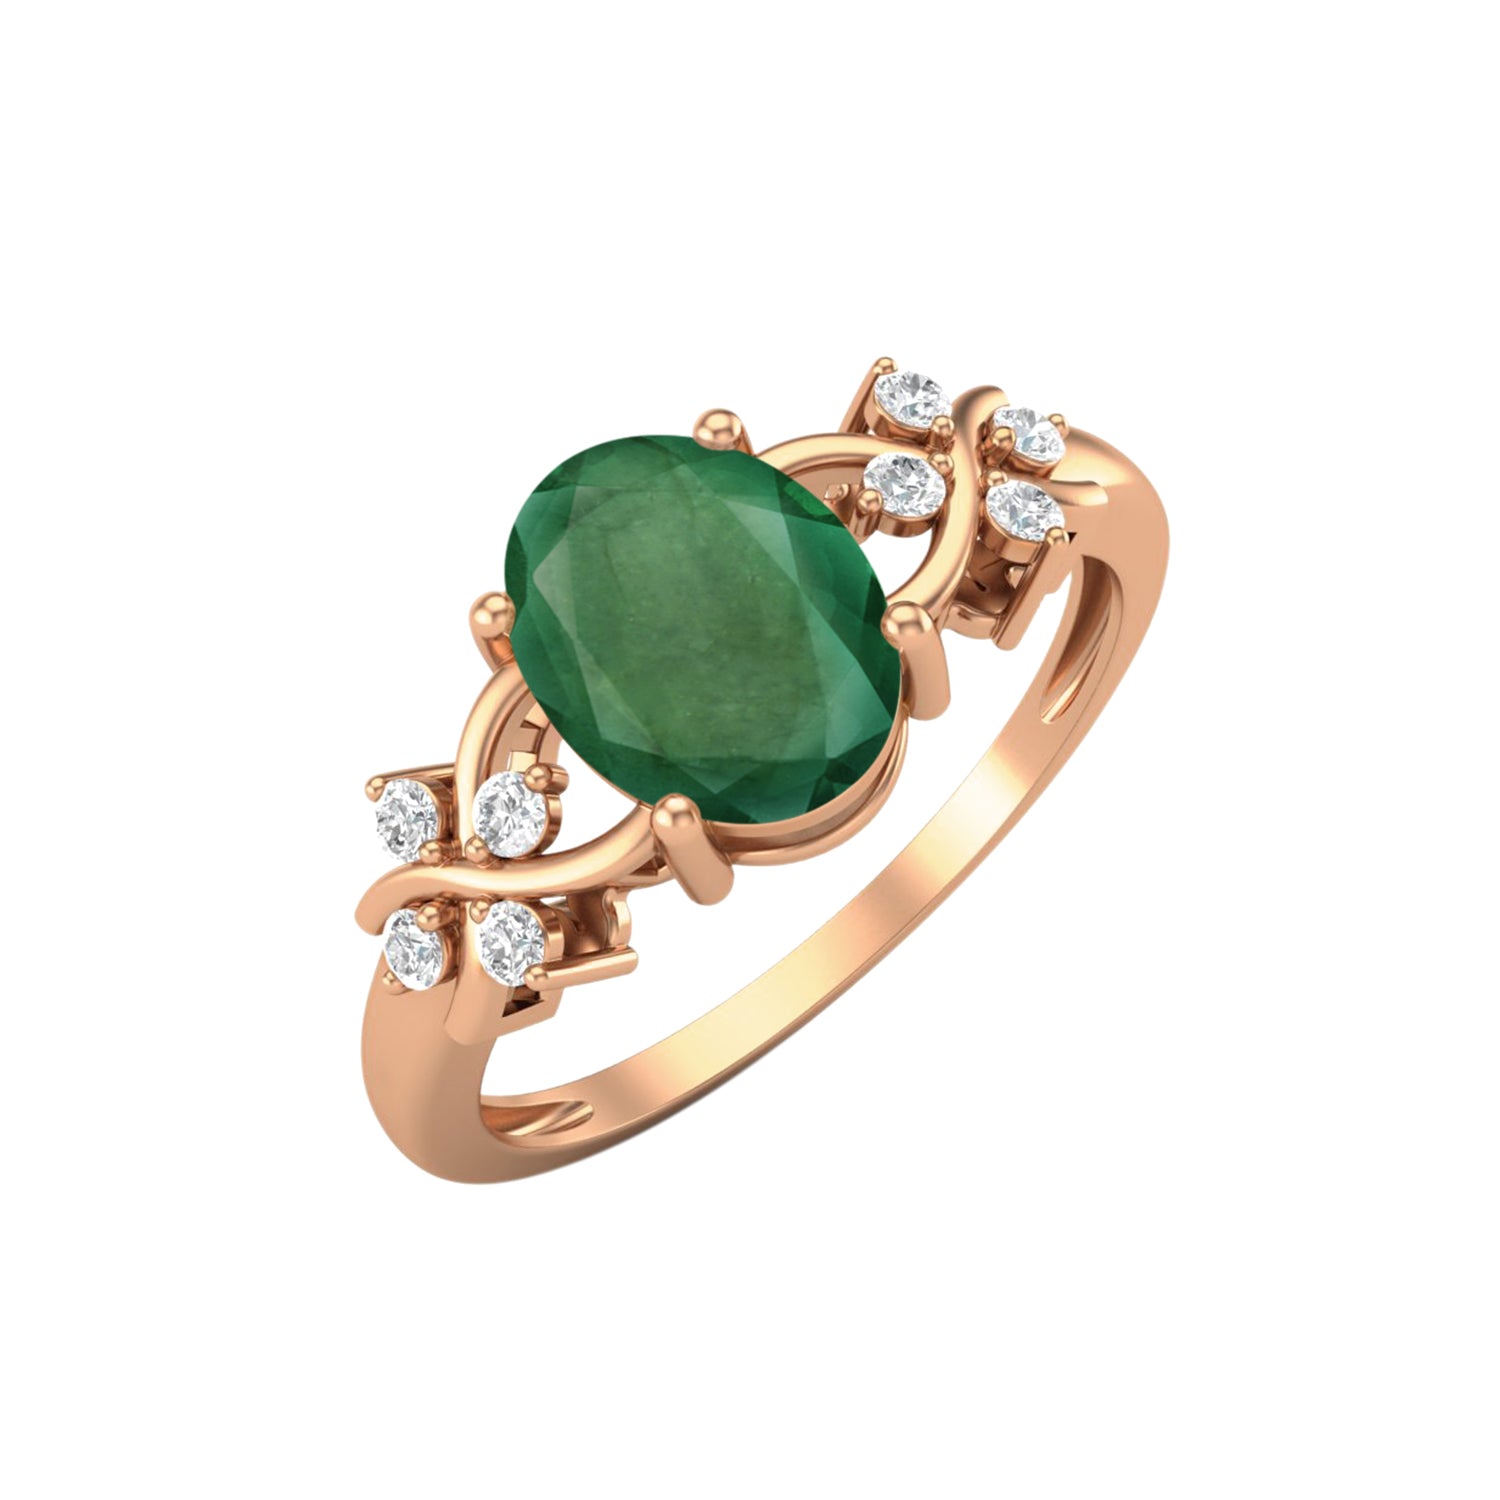 Gold emerald ring with diamonds vintage style engagement ring